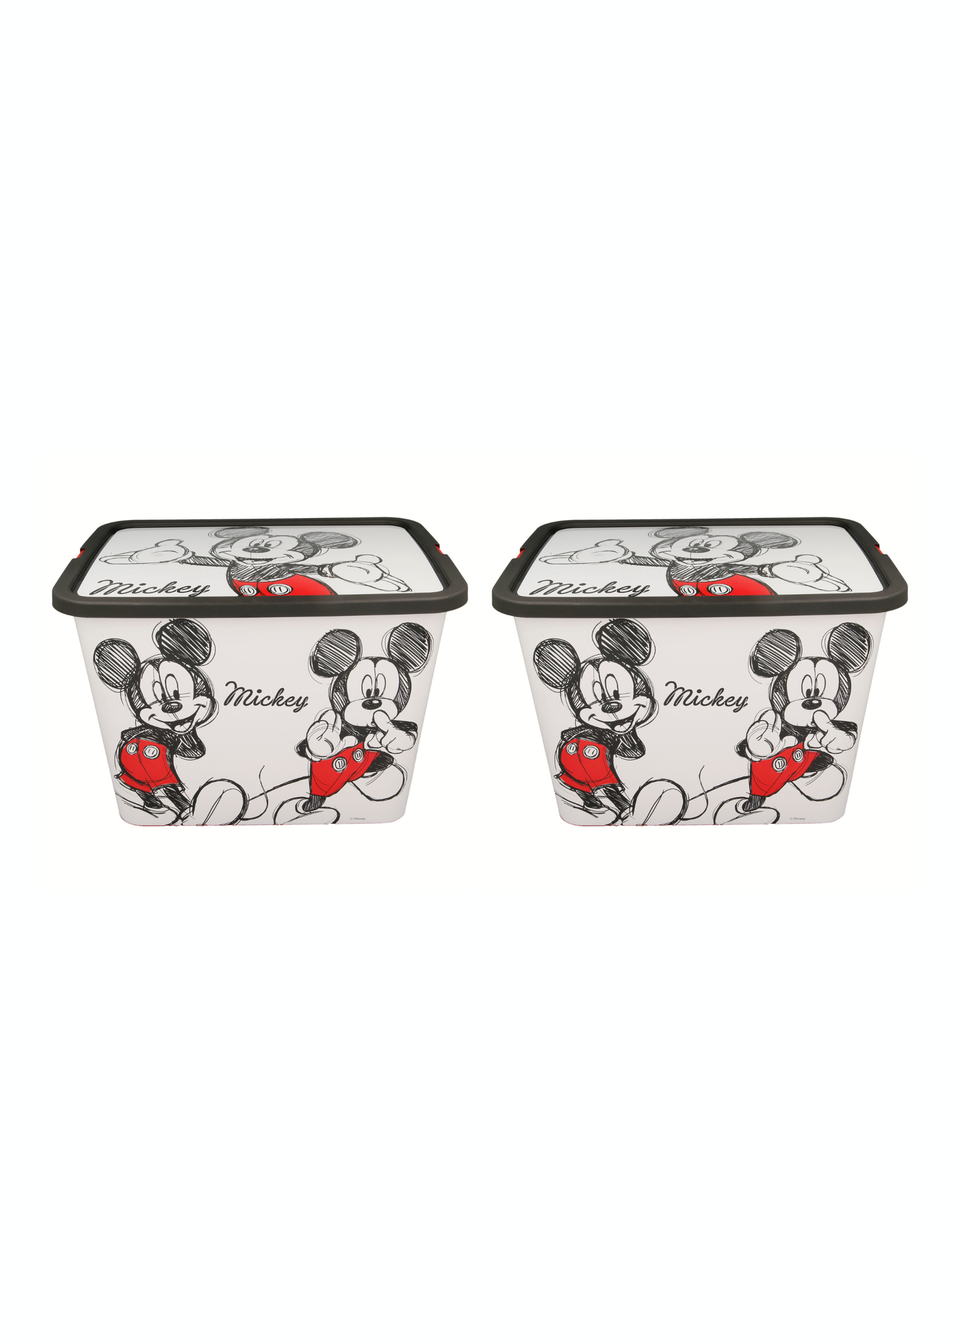 Mickey Mouse 23L Storage Boxes - Set of 2